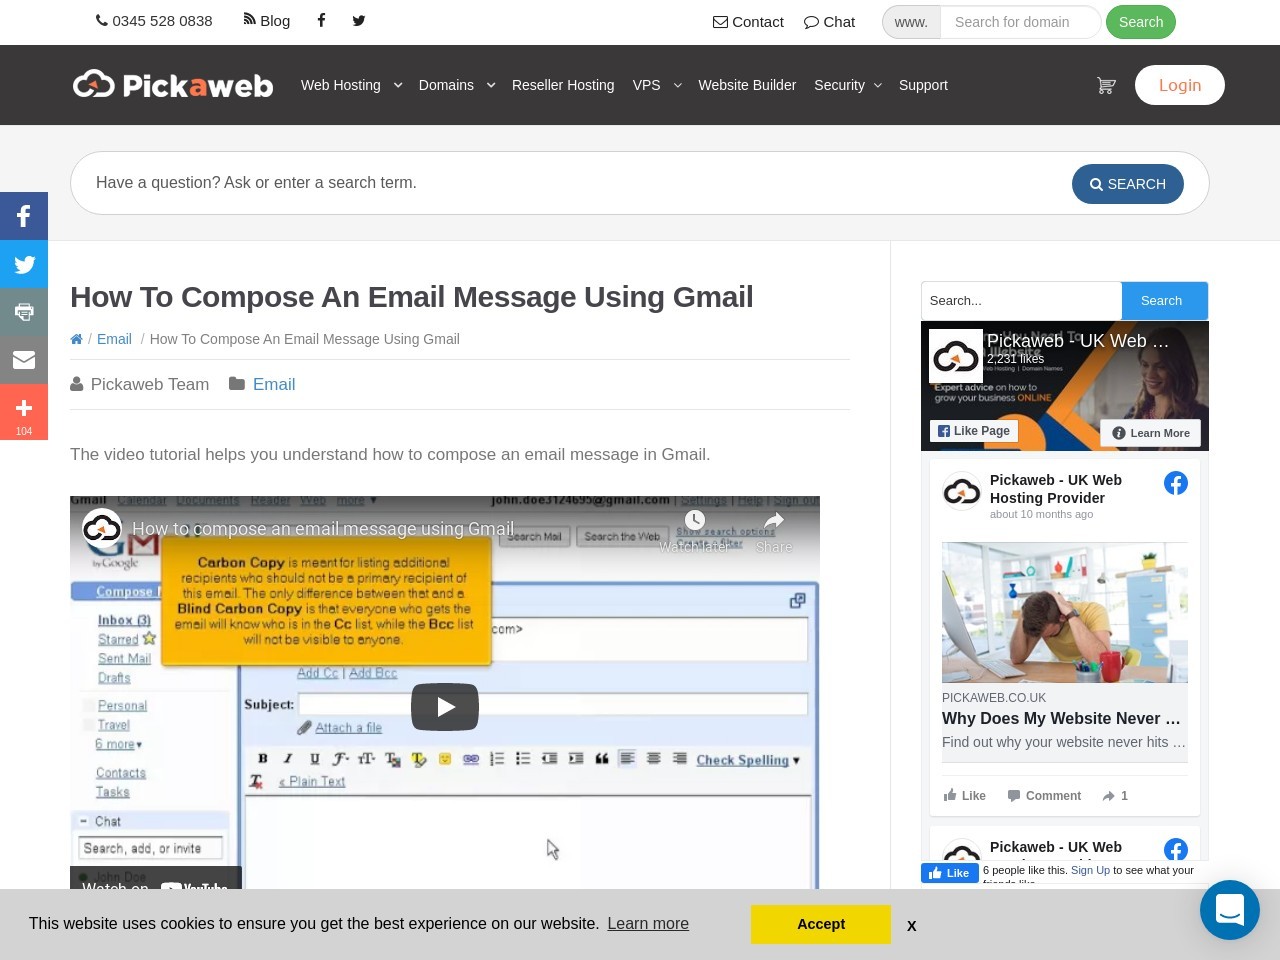 How To Compose An Email Message Using Gmail - Pickaweb